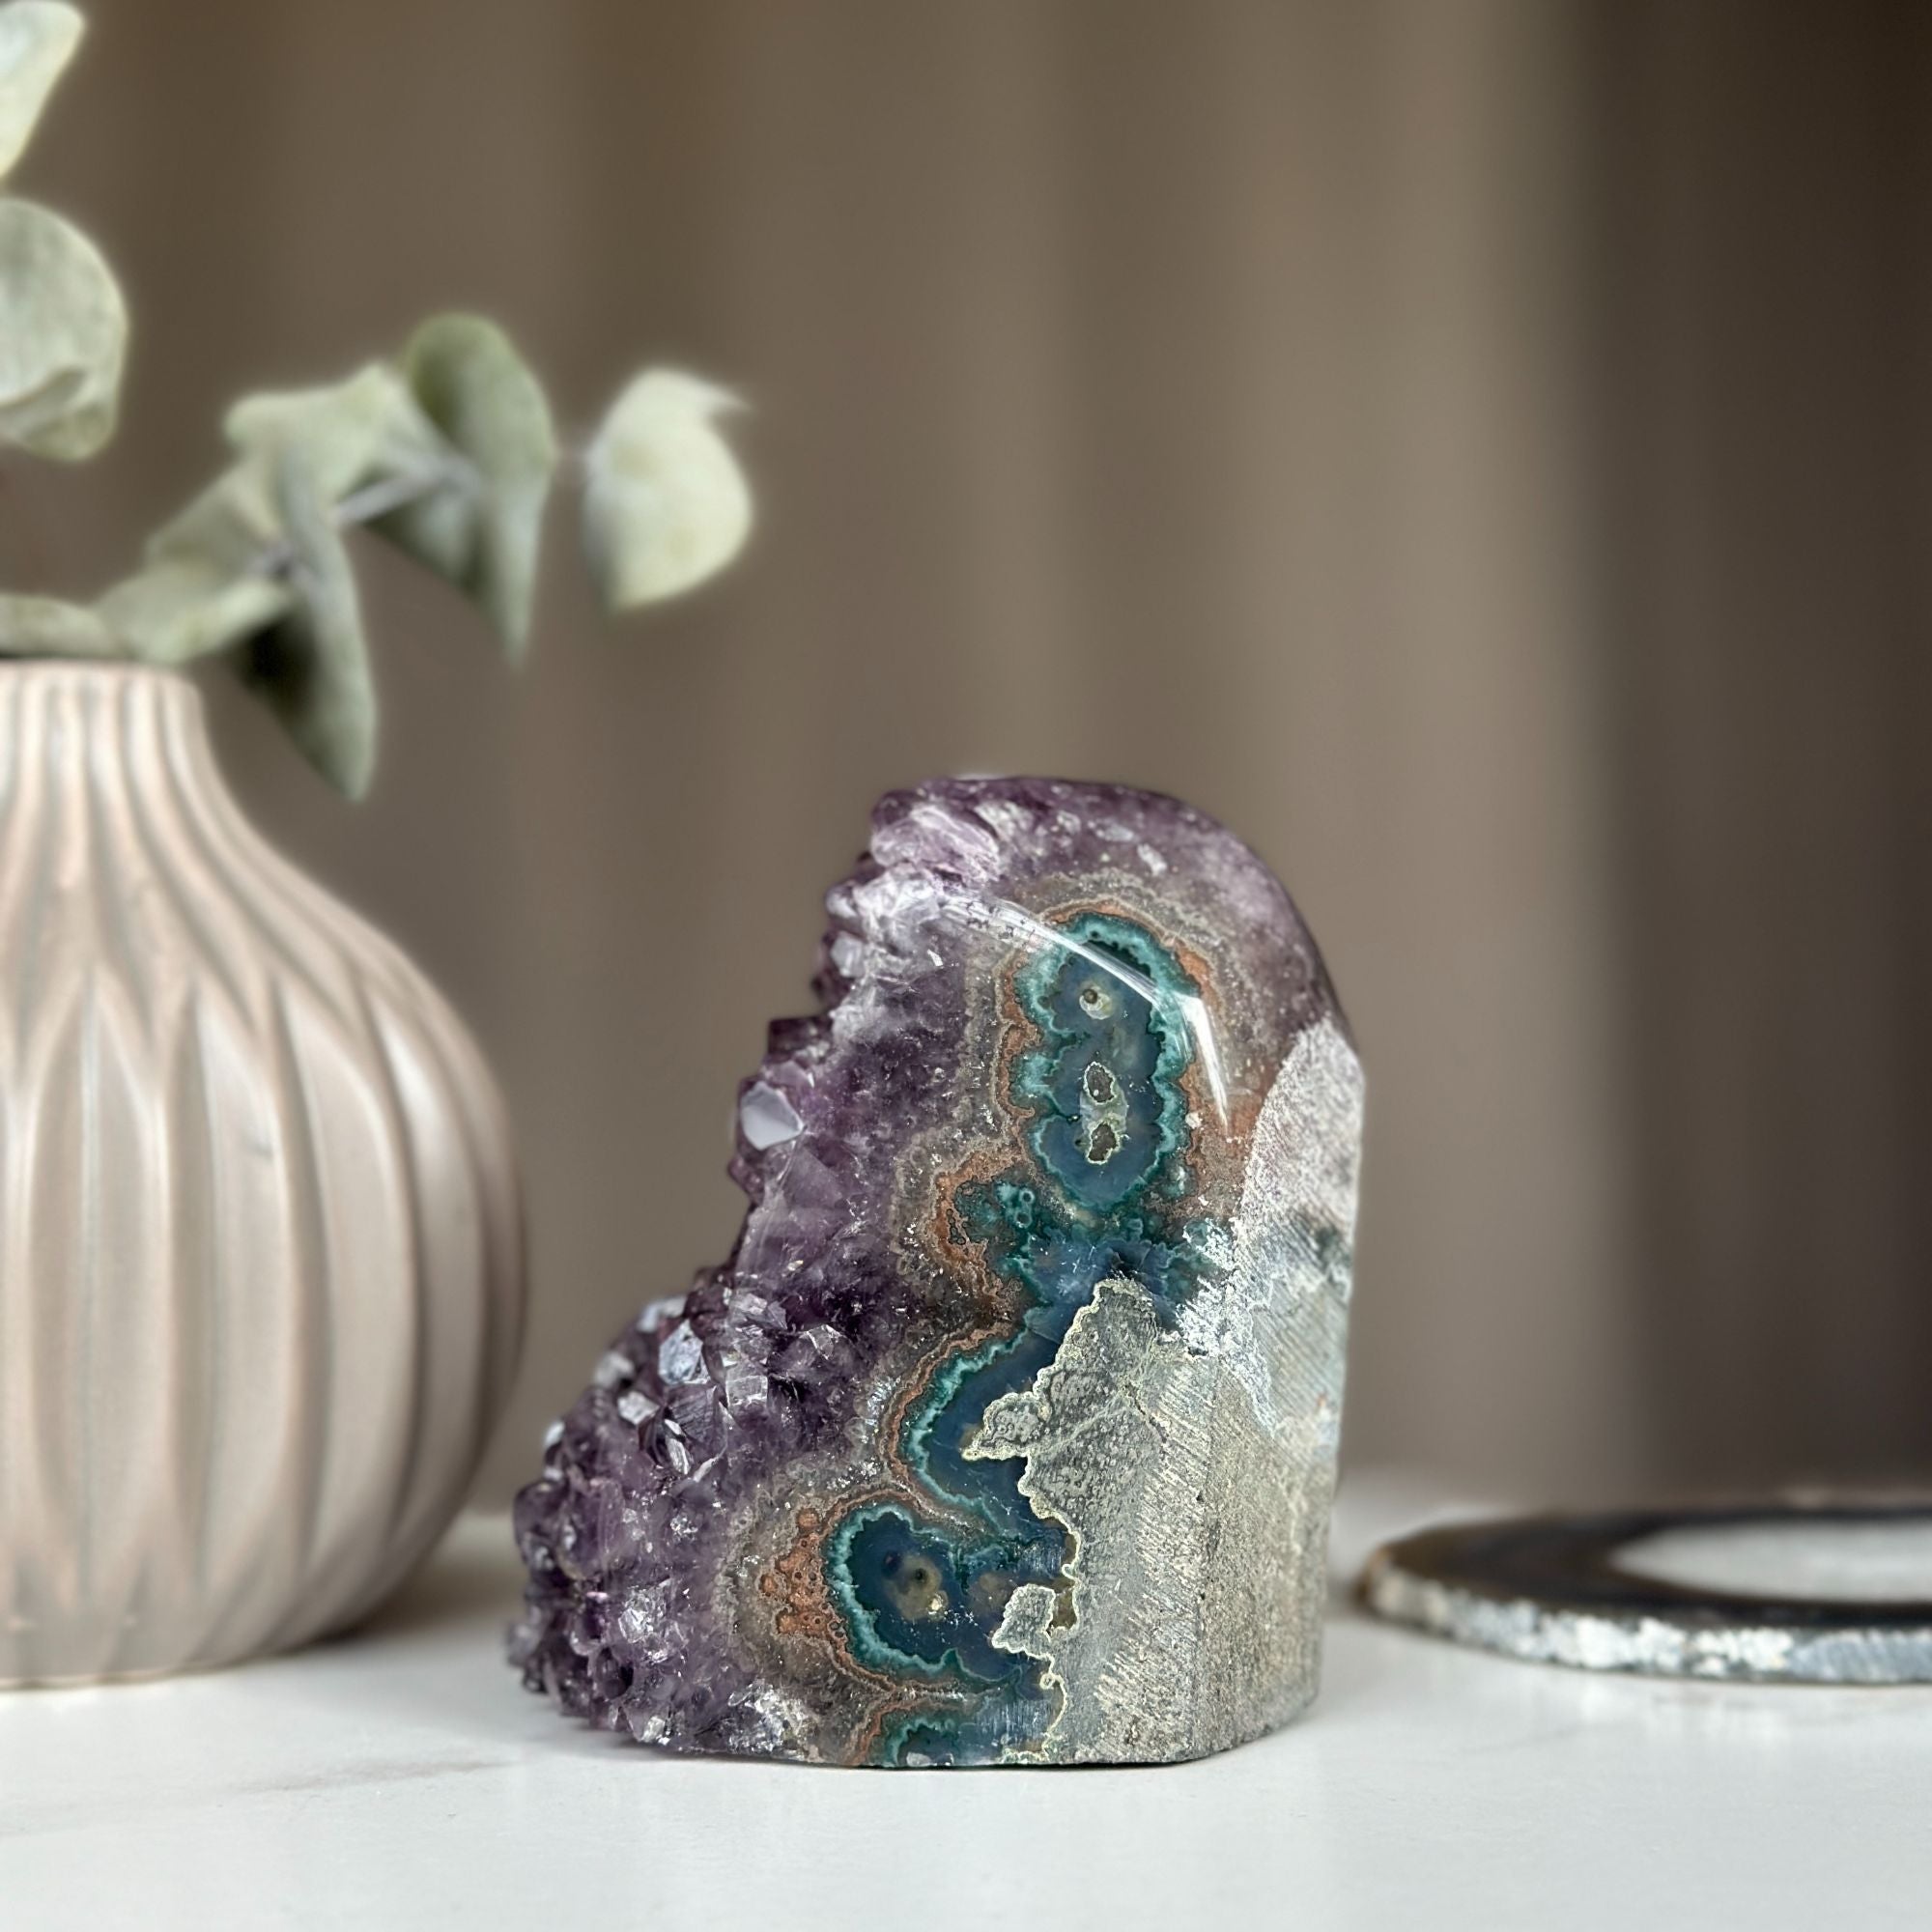 Amethyst with jasper and agate formations